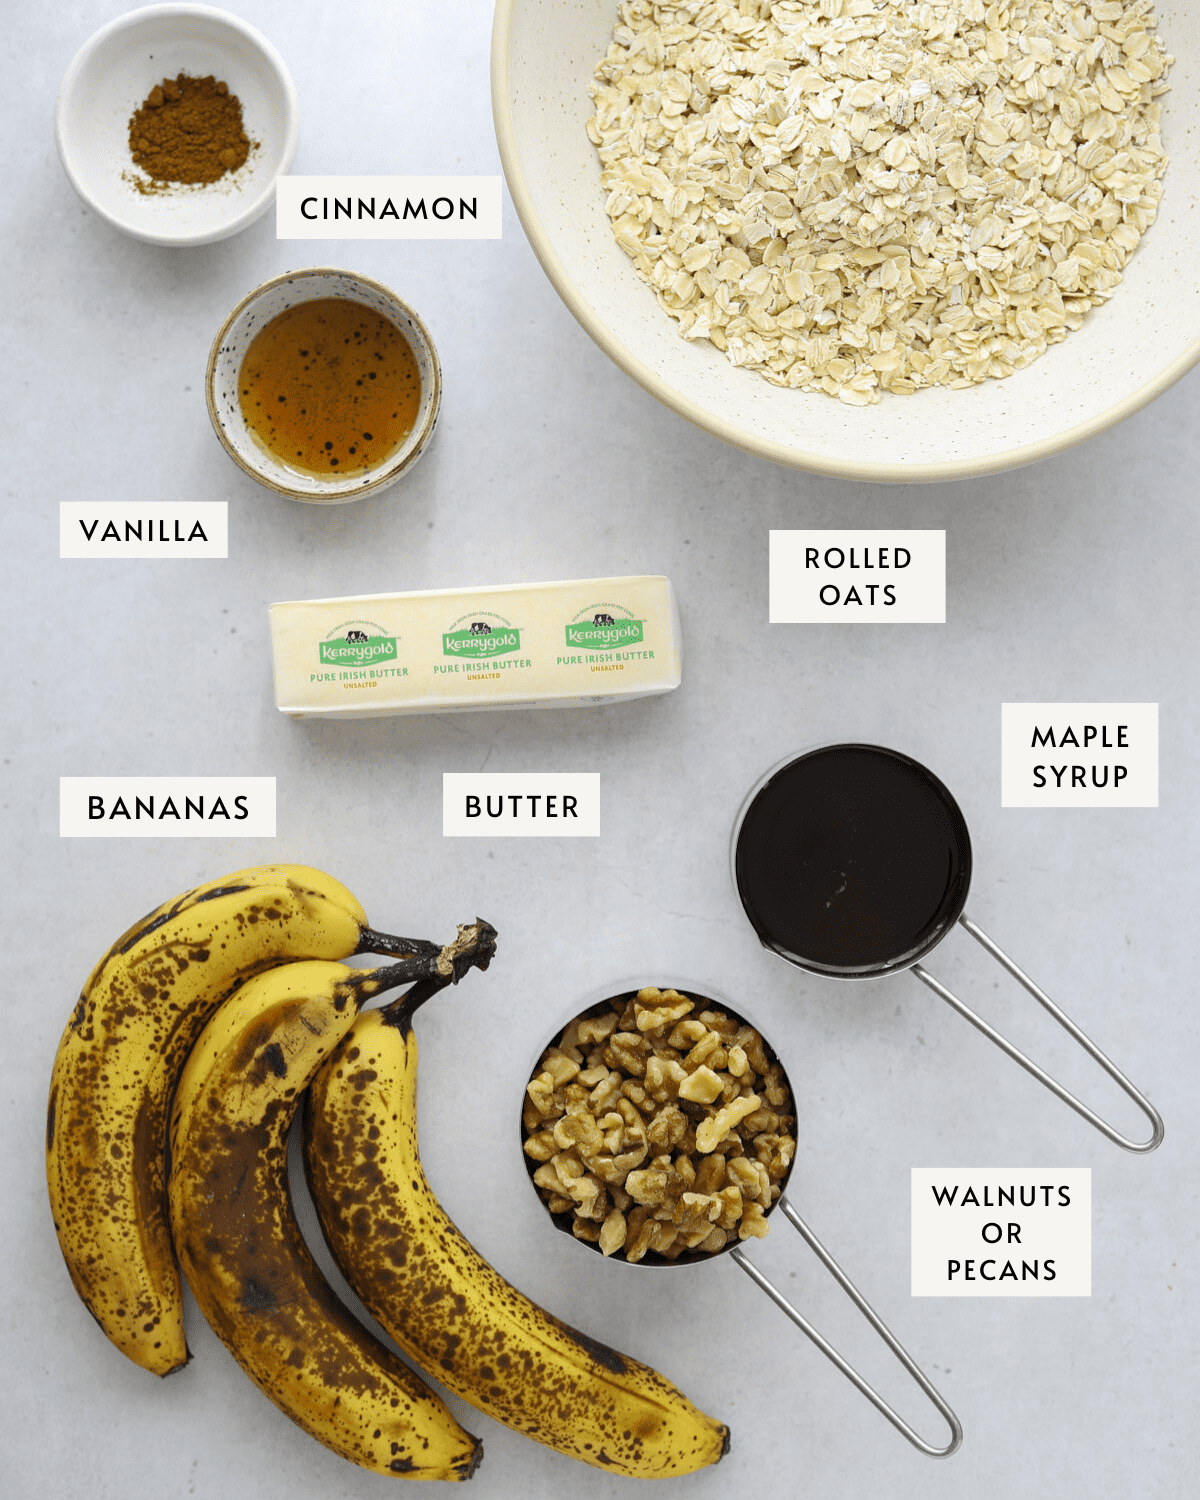 a bowl of rolled oats, three ripe bananas, maple syrup in a measuring cup, a stick of butter, chopped walnuts